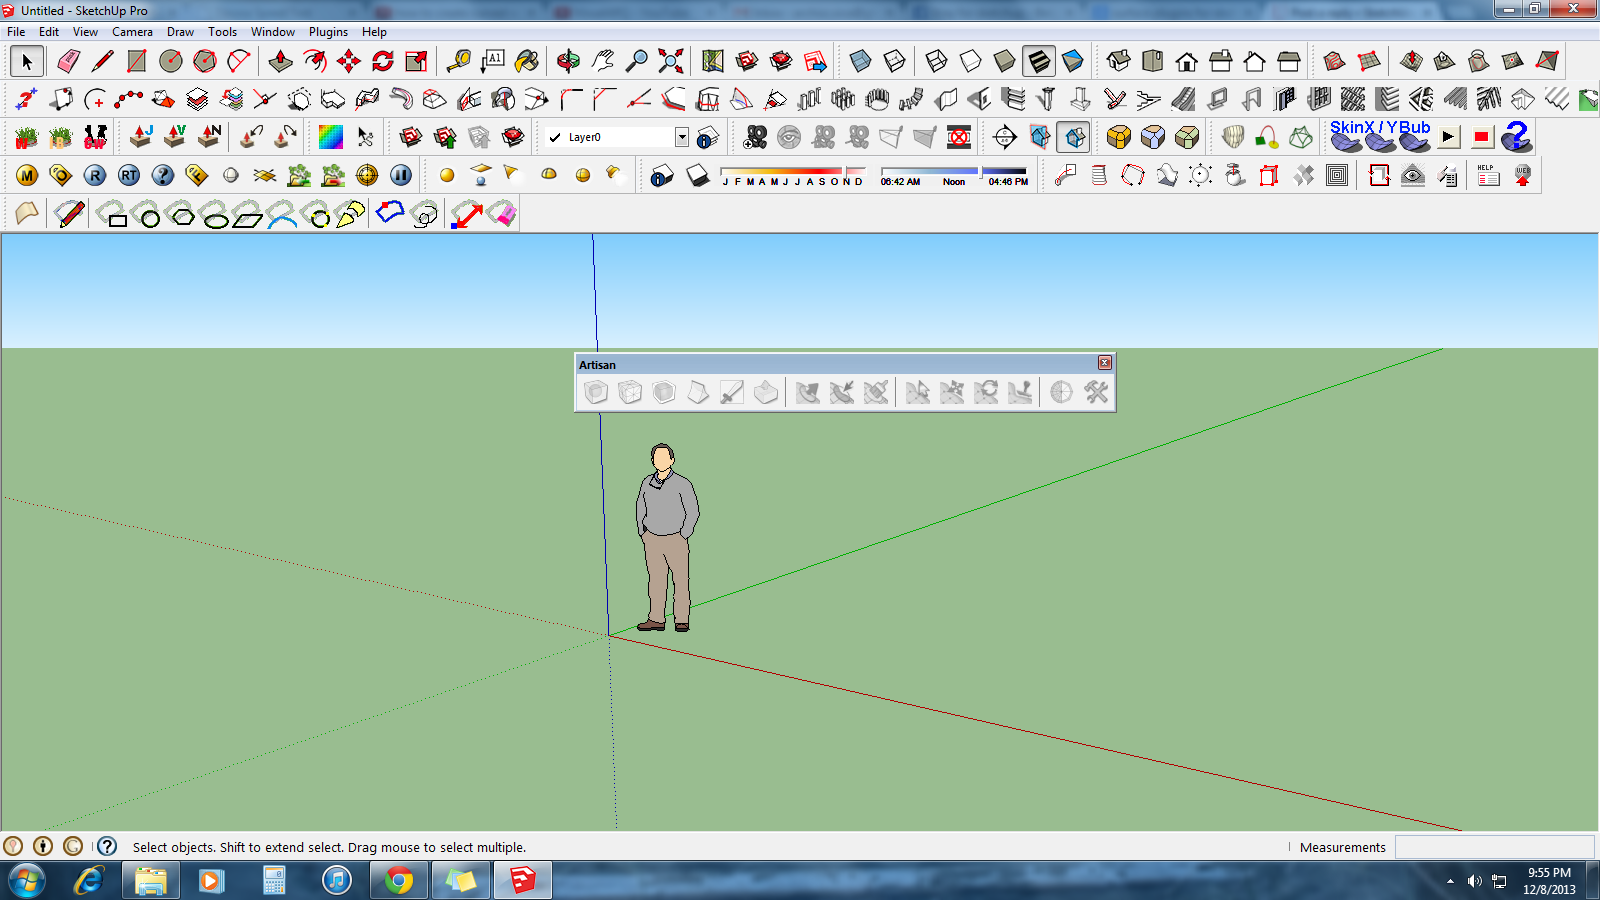 this is how showing in my sketchup screen pls help me out.